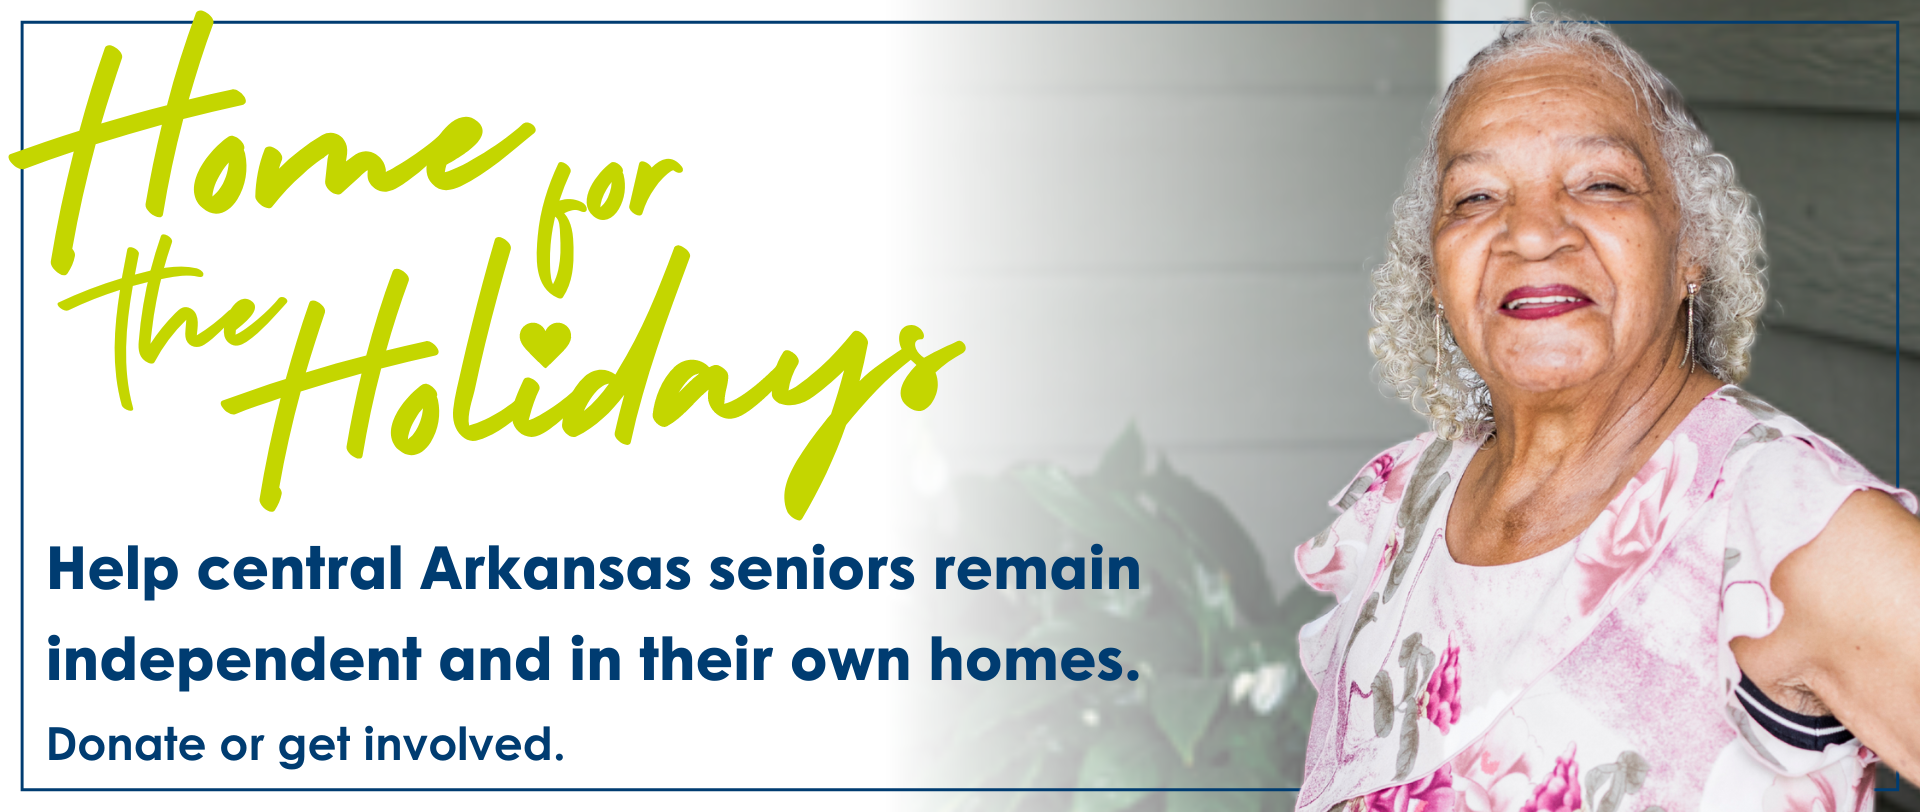 Home for the Holidays. Help Central Arkansas seniors remain independent and in their own homes. Donate or get involved.